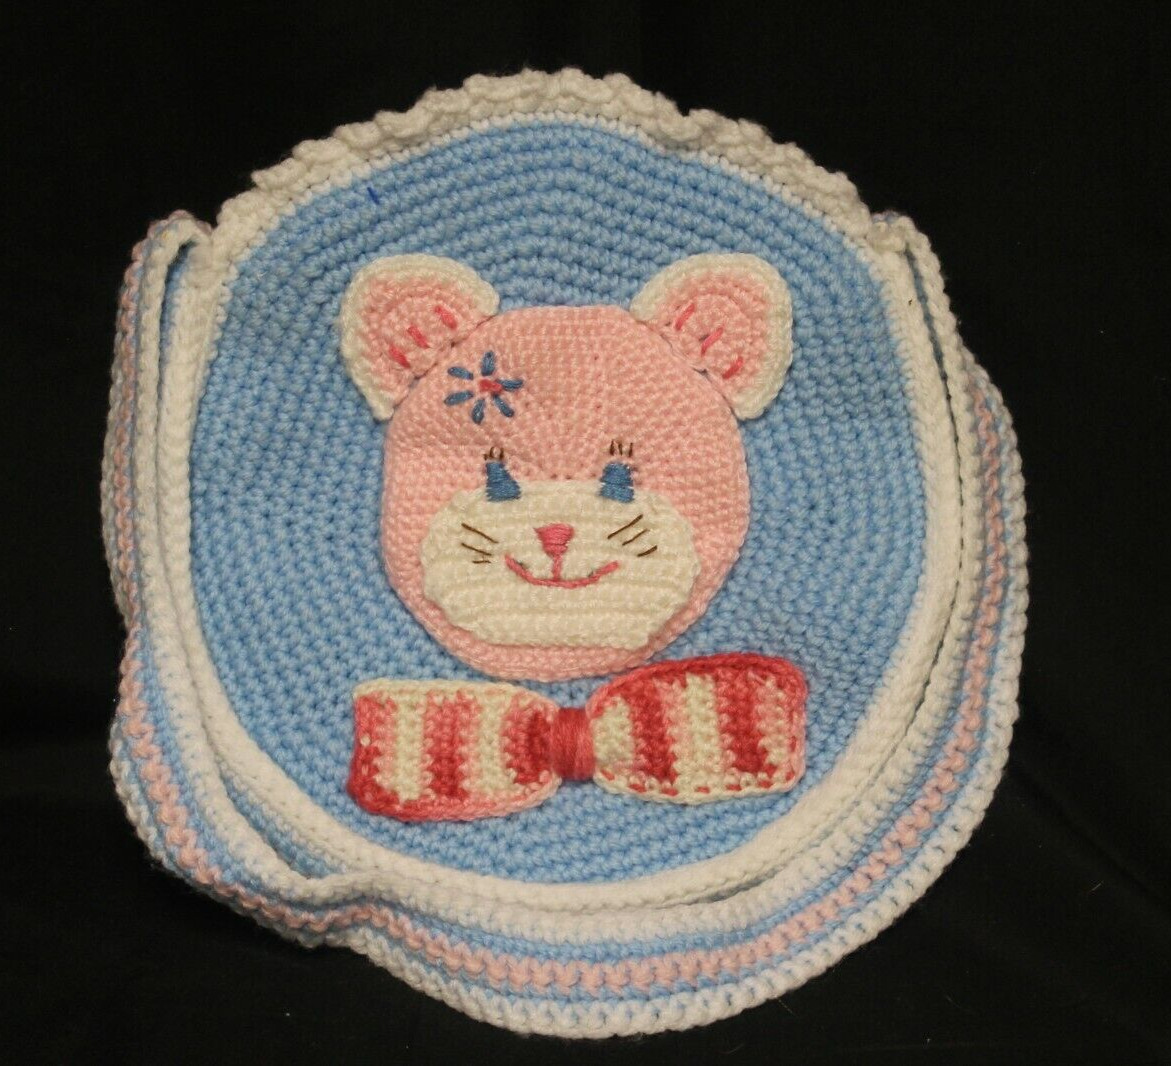 Blue Knitted/crochet Round Shoulder Bag Pink Kitty Kitten Cat Face Bow Lined